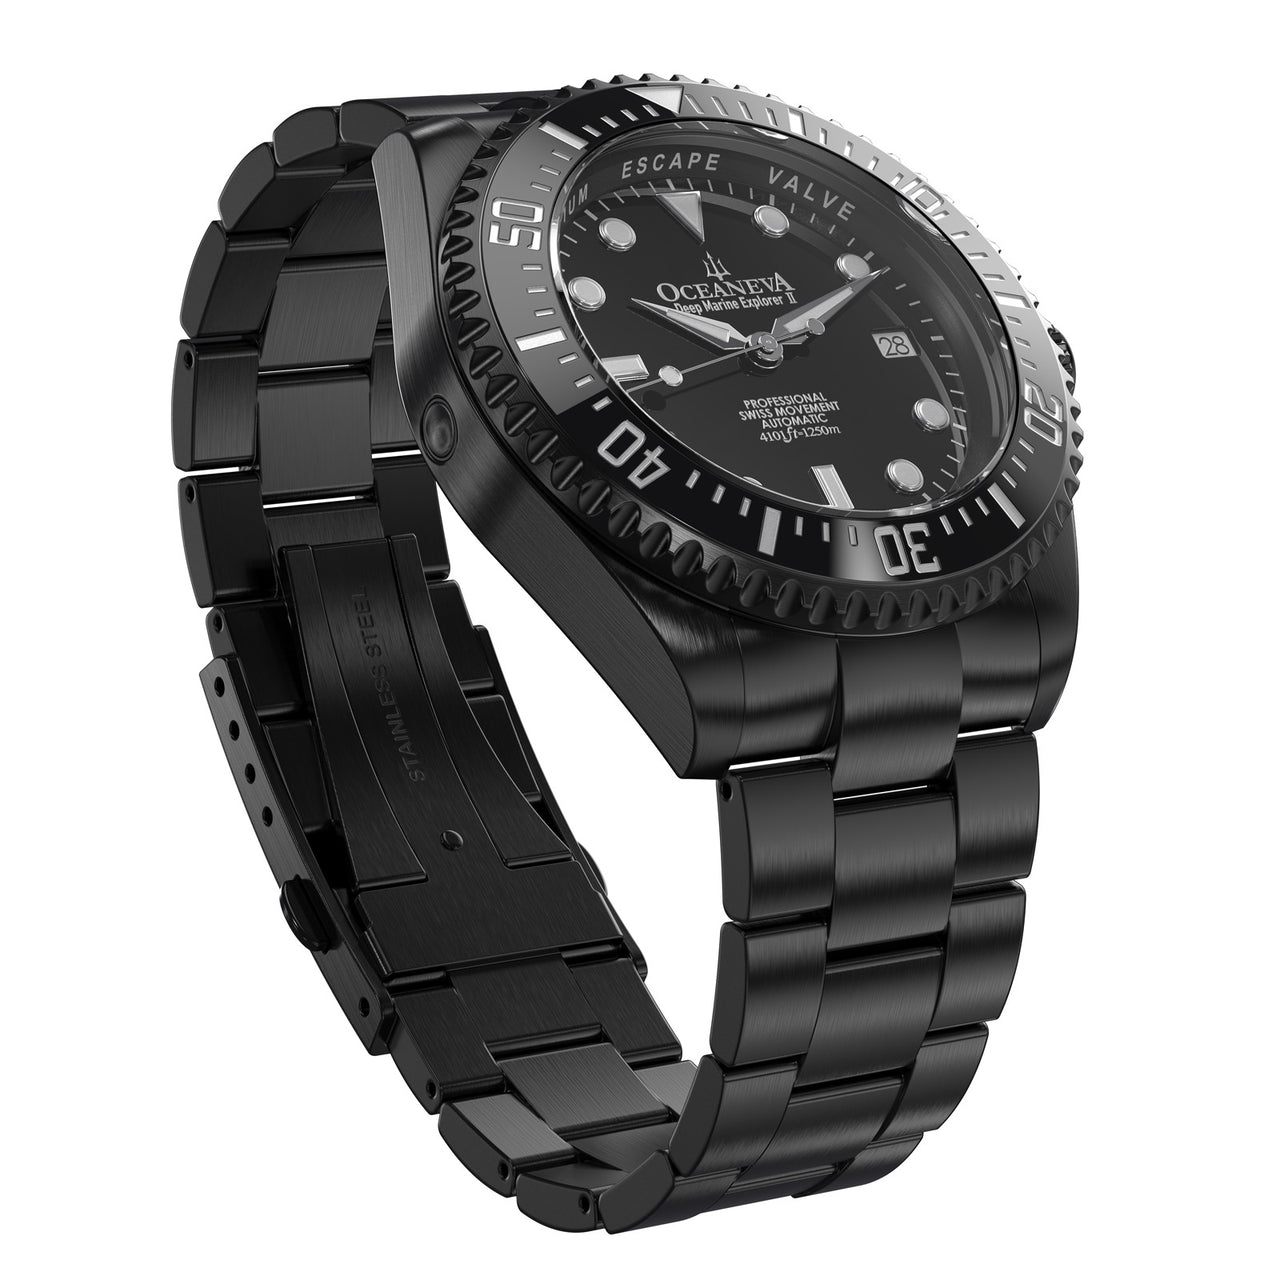 Oceaneva 1250M Dive Watch Black Dial Front Picture Slight Right Slant View